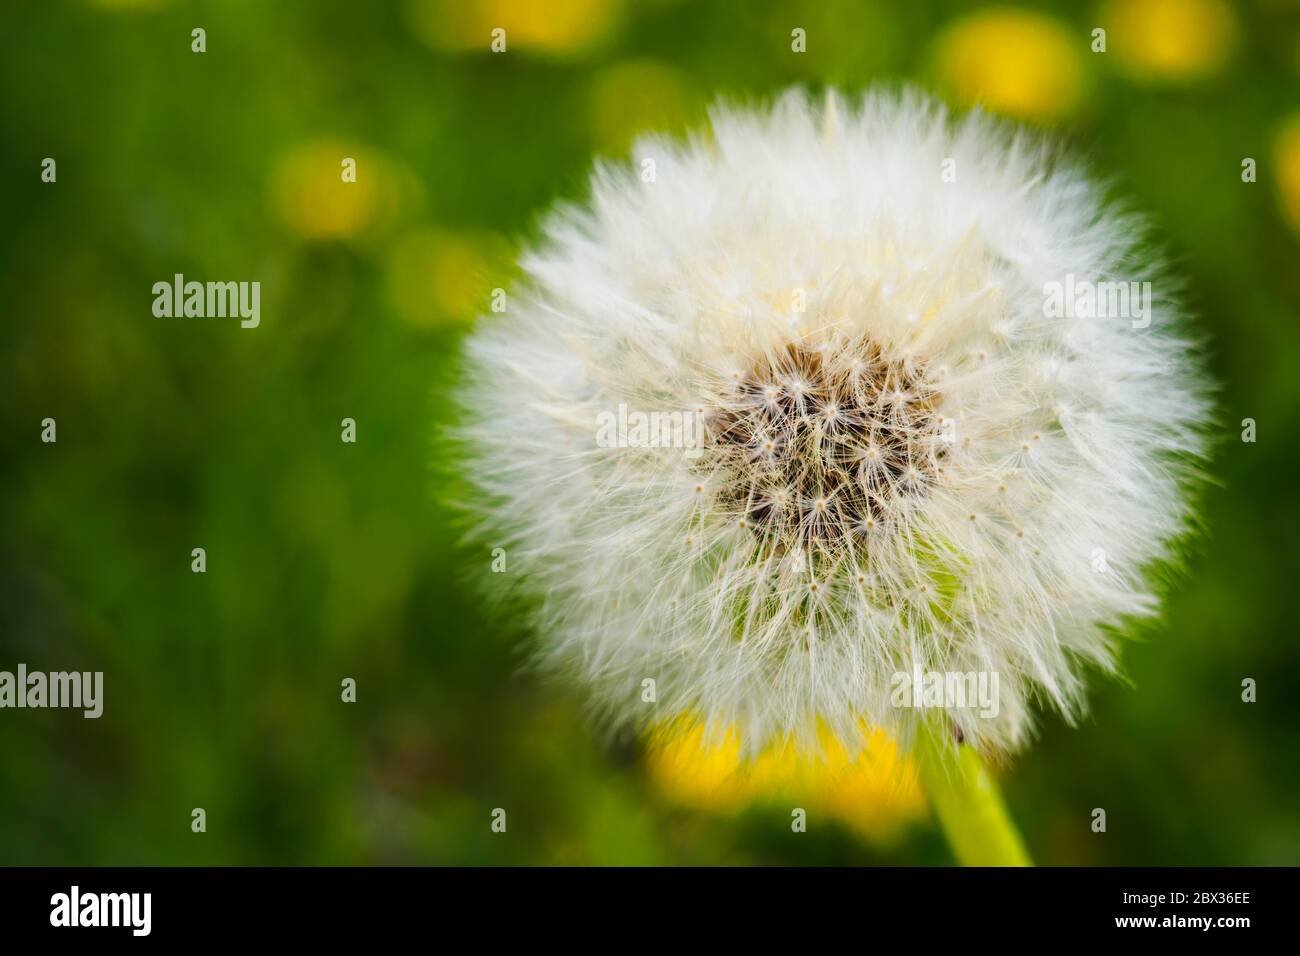 White dandelion seed head on green background, selective focus, copy space Stock Photo